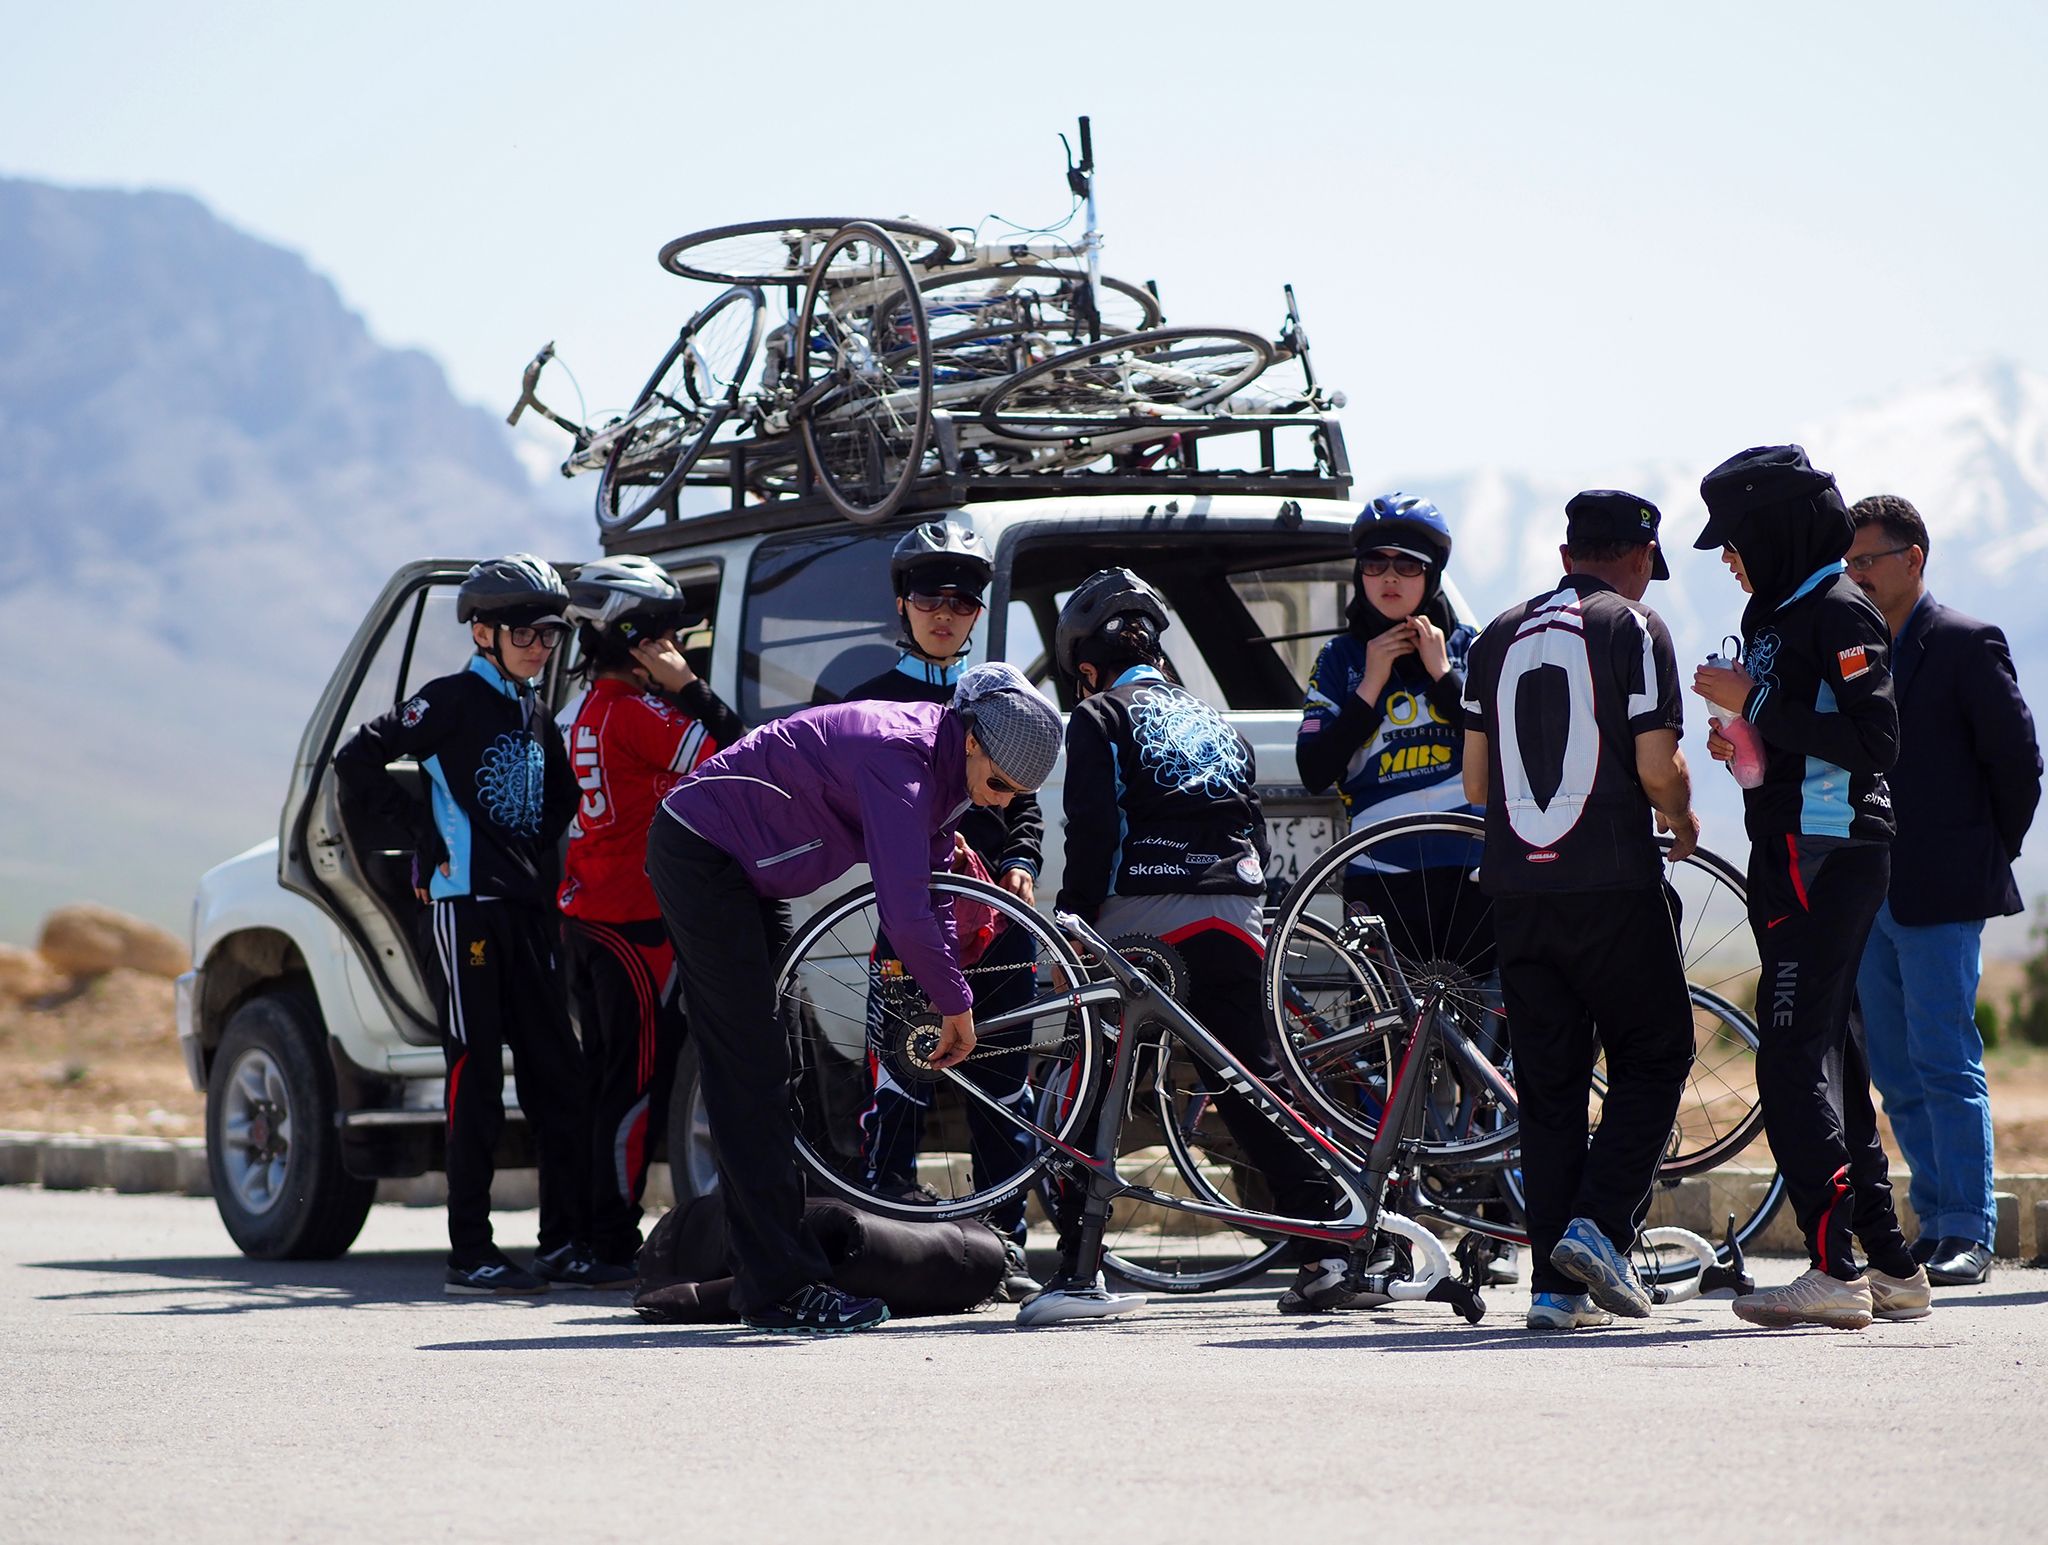 Galpin and the Afghan National Team on a training ride outside Kabul in 2014.